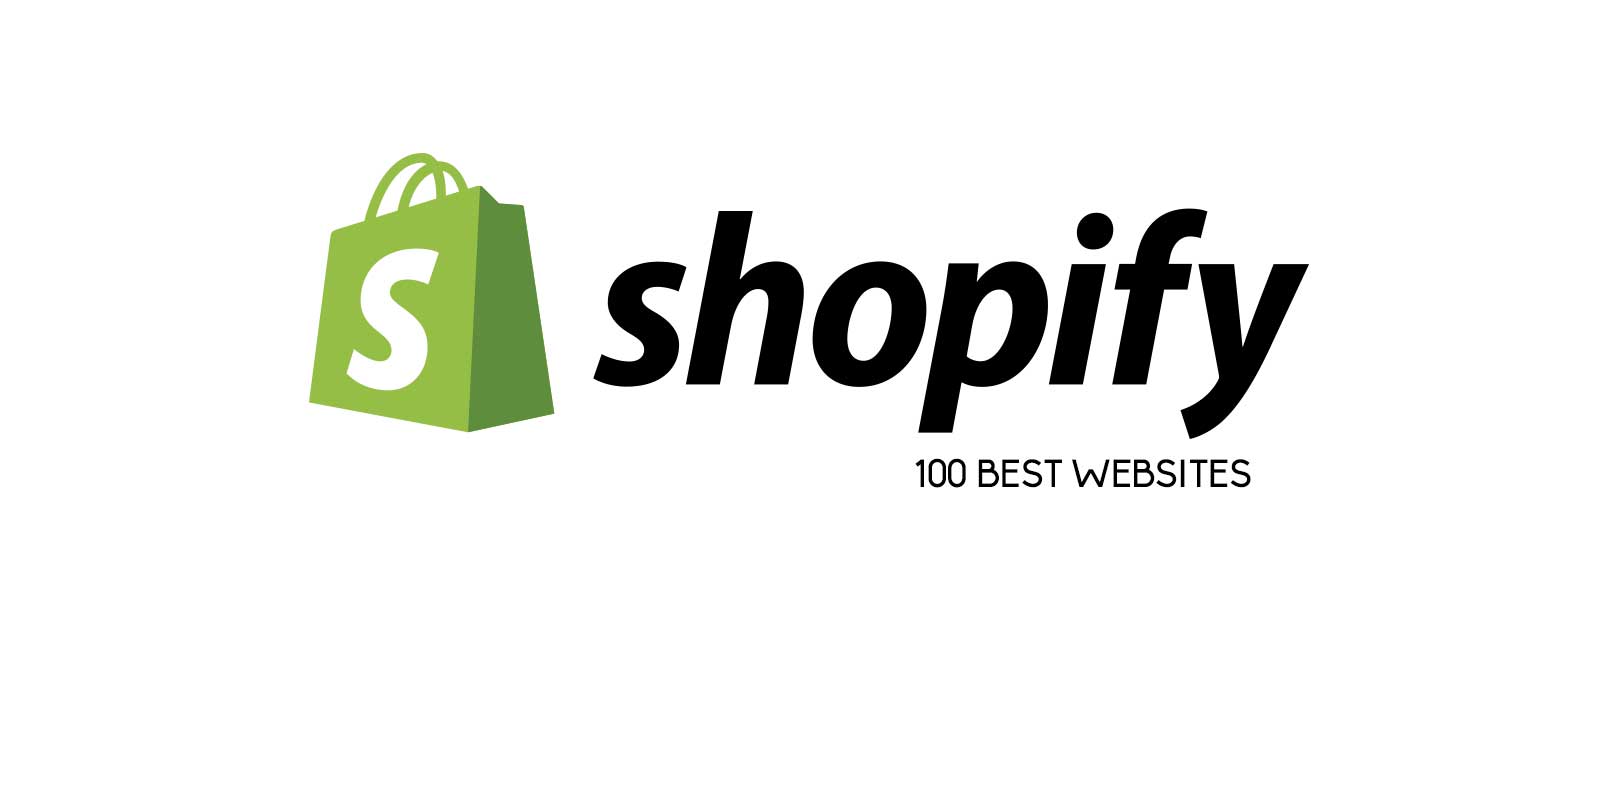 Shopify Ranks Slyde Handboards in Top 100 Most Beautiful & Creative Ecommerce Websites For Sports & Fitness